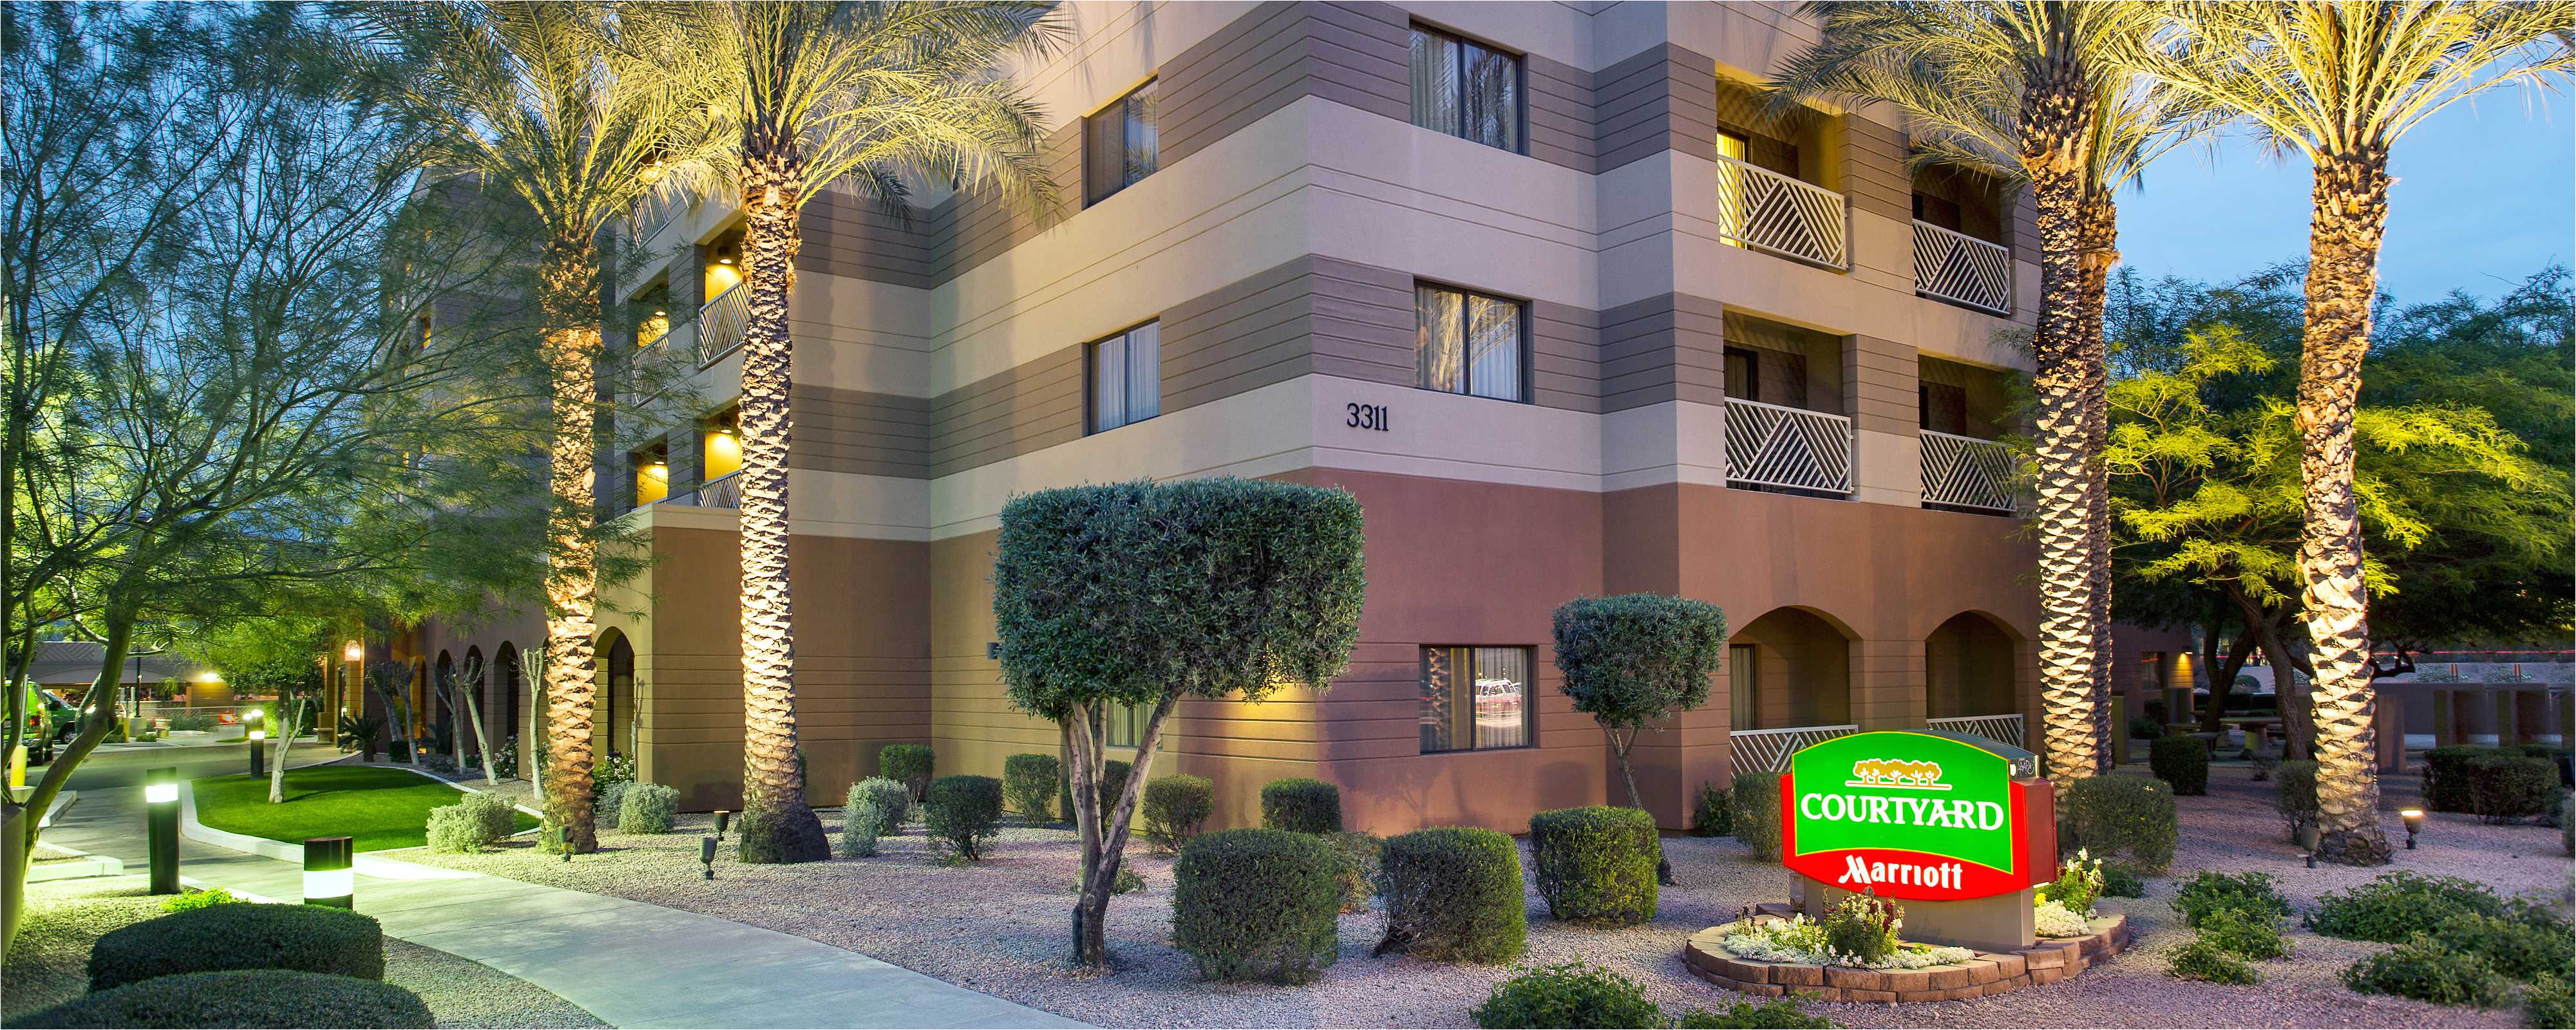 Old town Bay St Louis Homes for Sale Old town Scottsdale Hotels Courtyard Scottsdale Old town